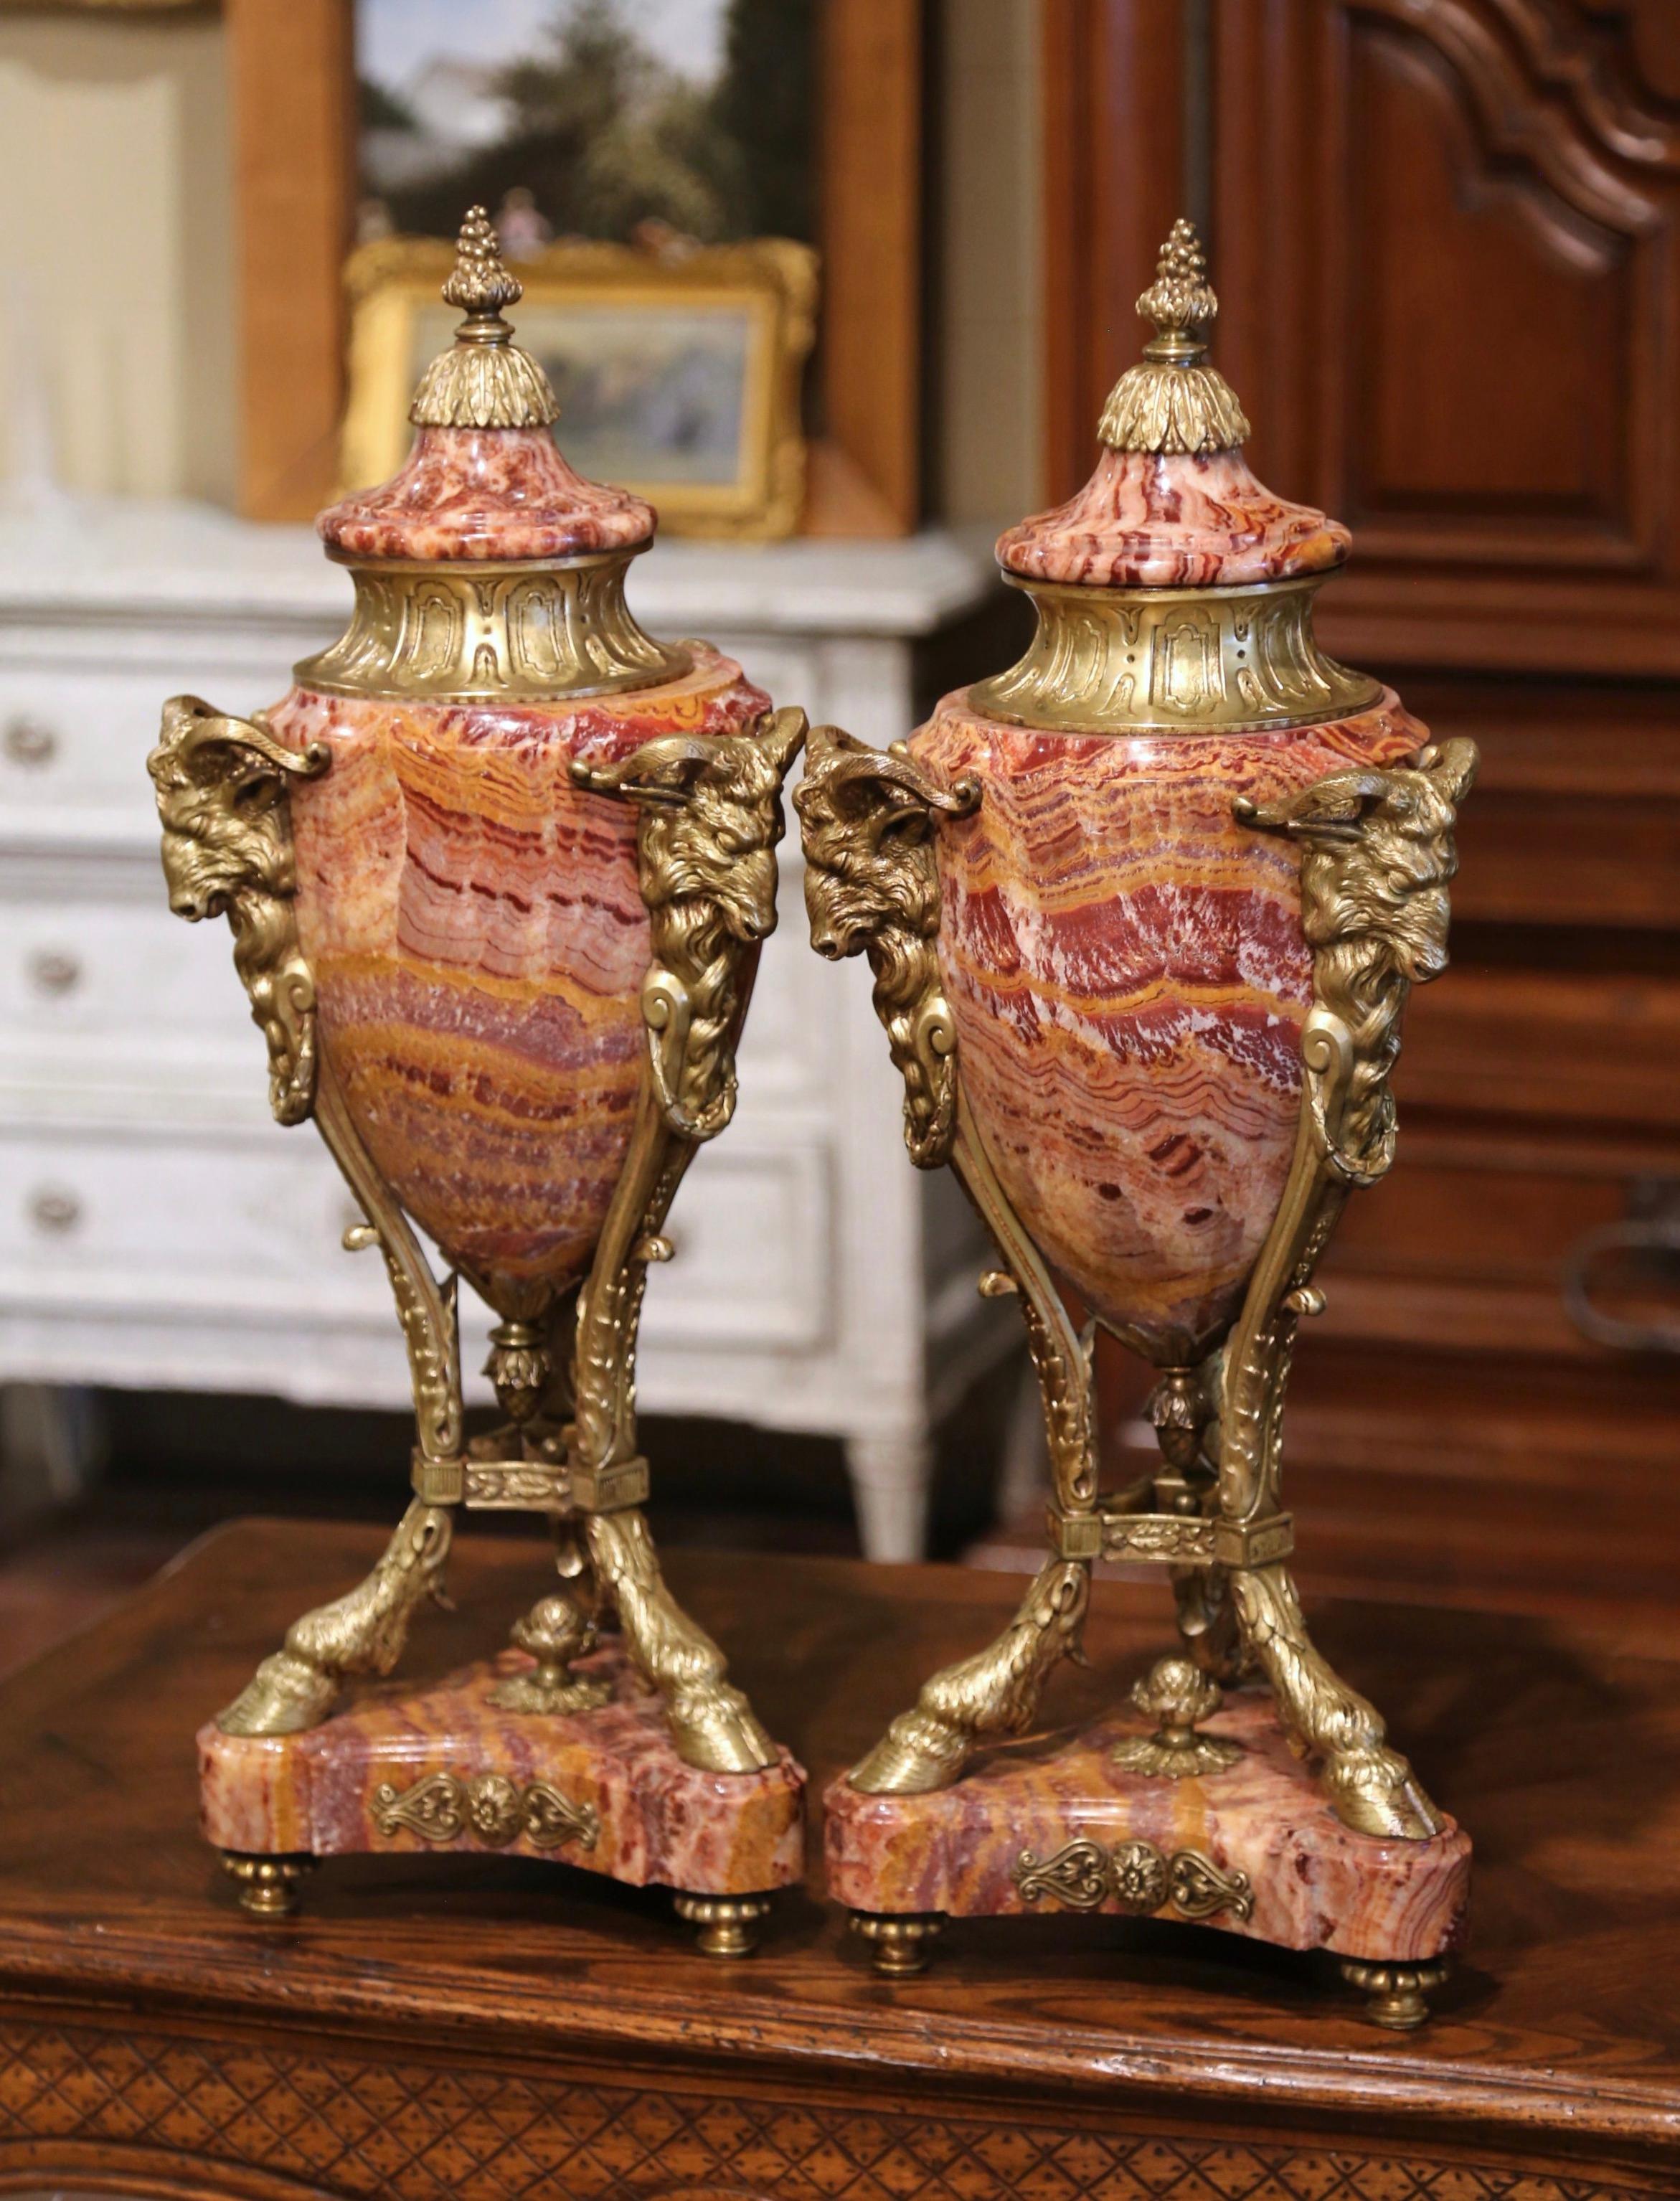 Patinated Pair of 19th Century Belgium Gilt Bronze-Mounted Variegated Onyx Covered Urns